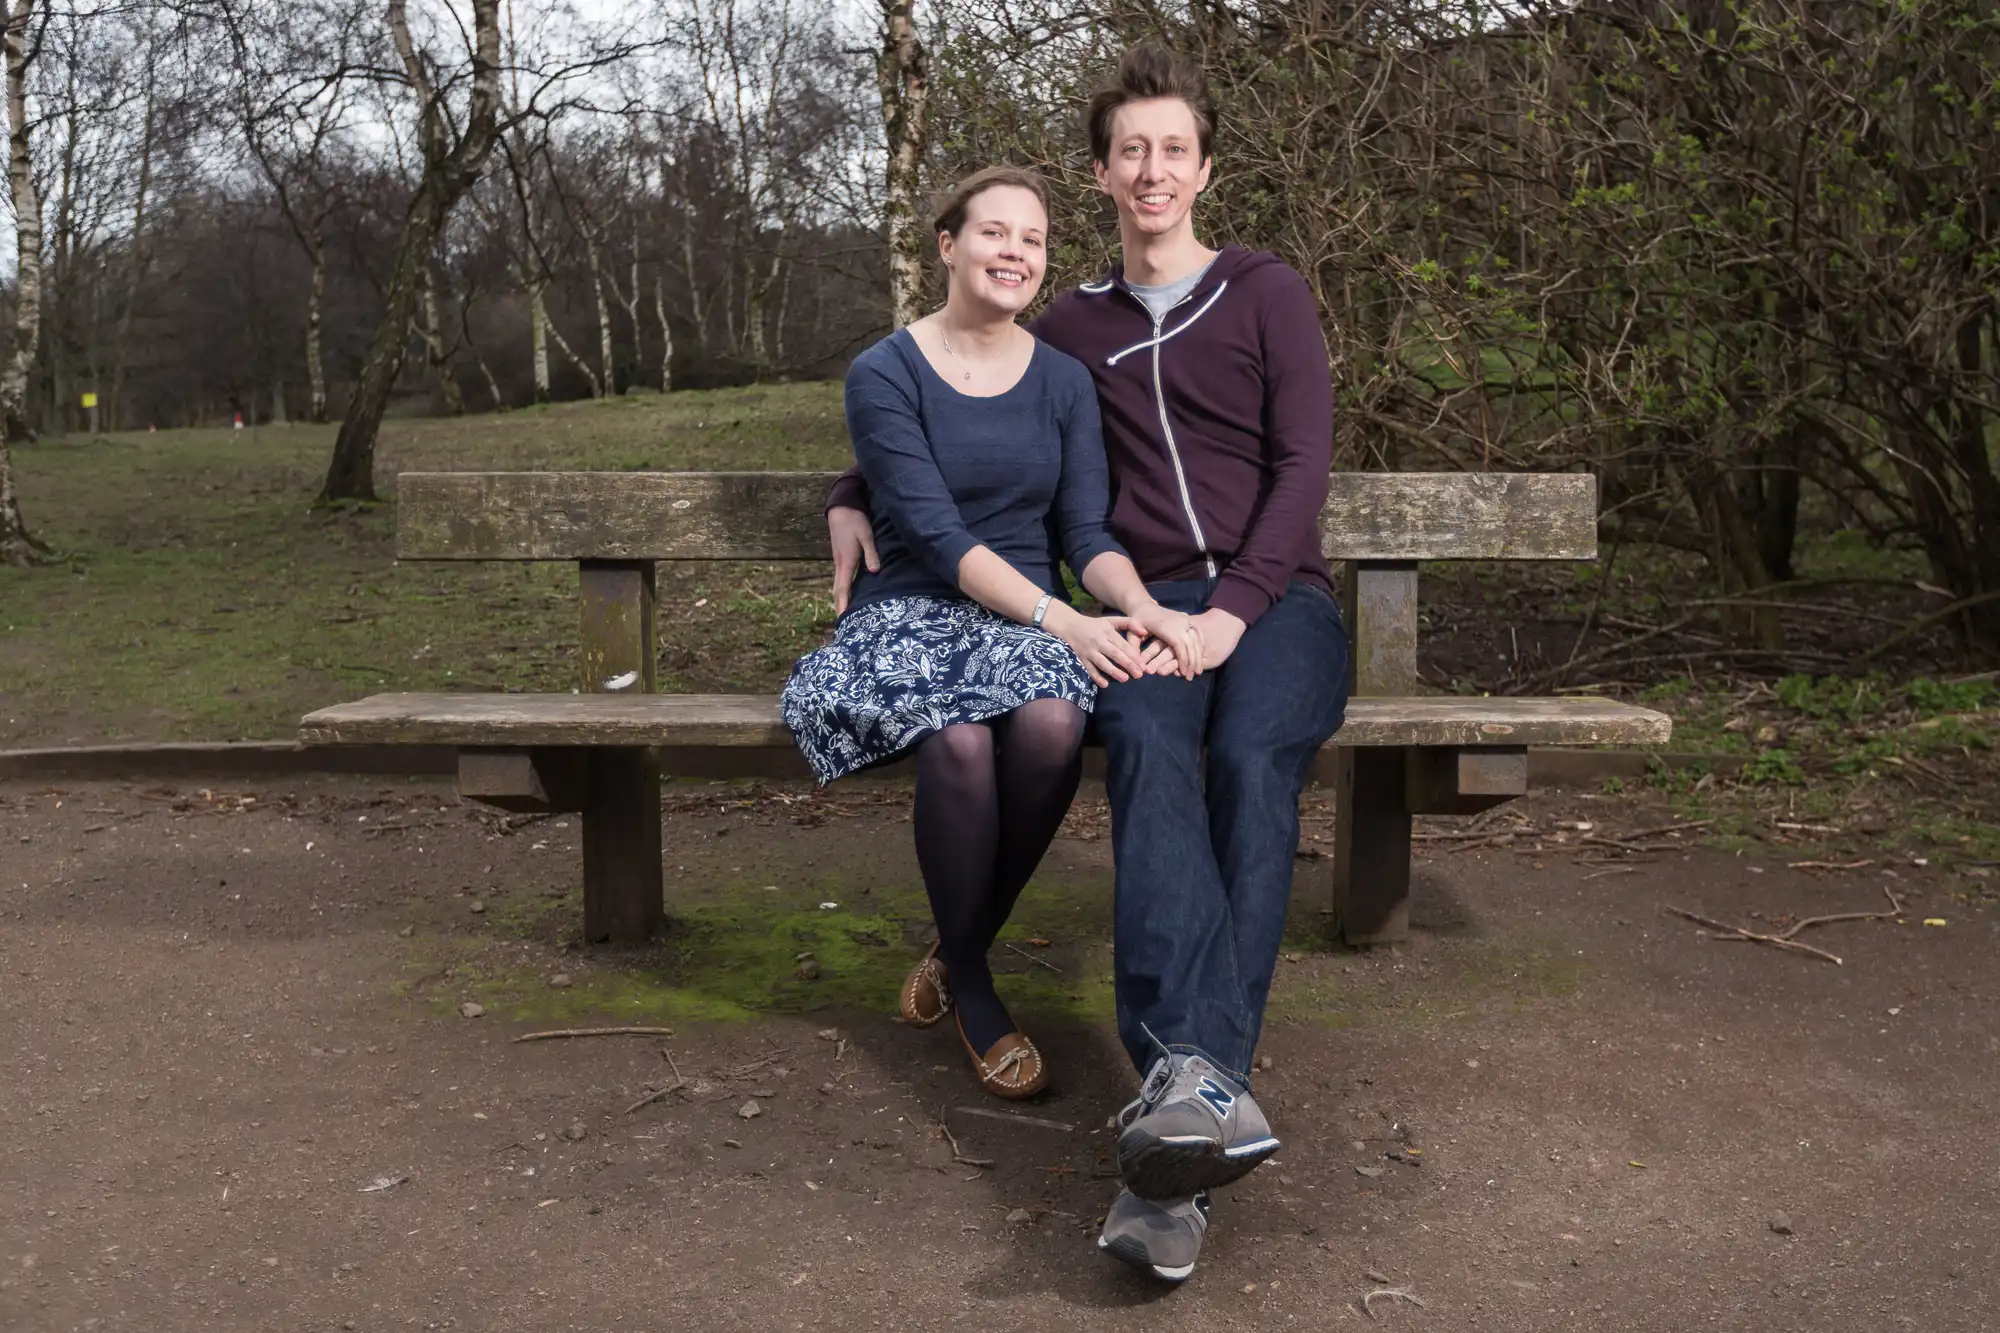 A man and a woman sitting closely on a park bench, smiling at the camera. both are dressed casually, surrounded by trees with some bare branches.